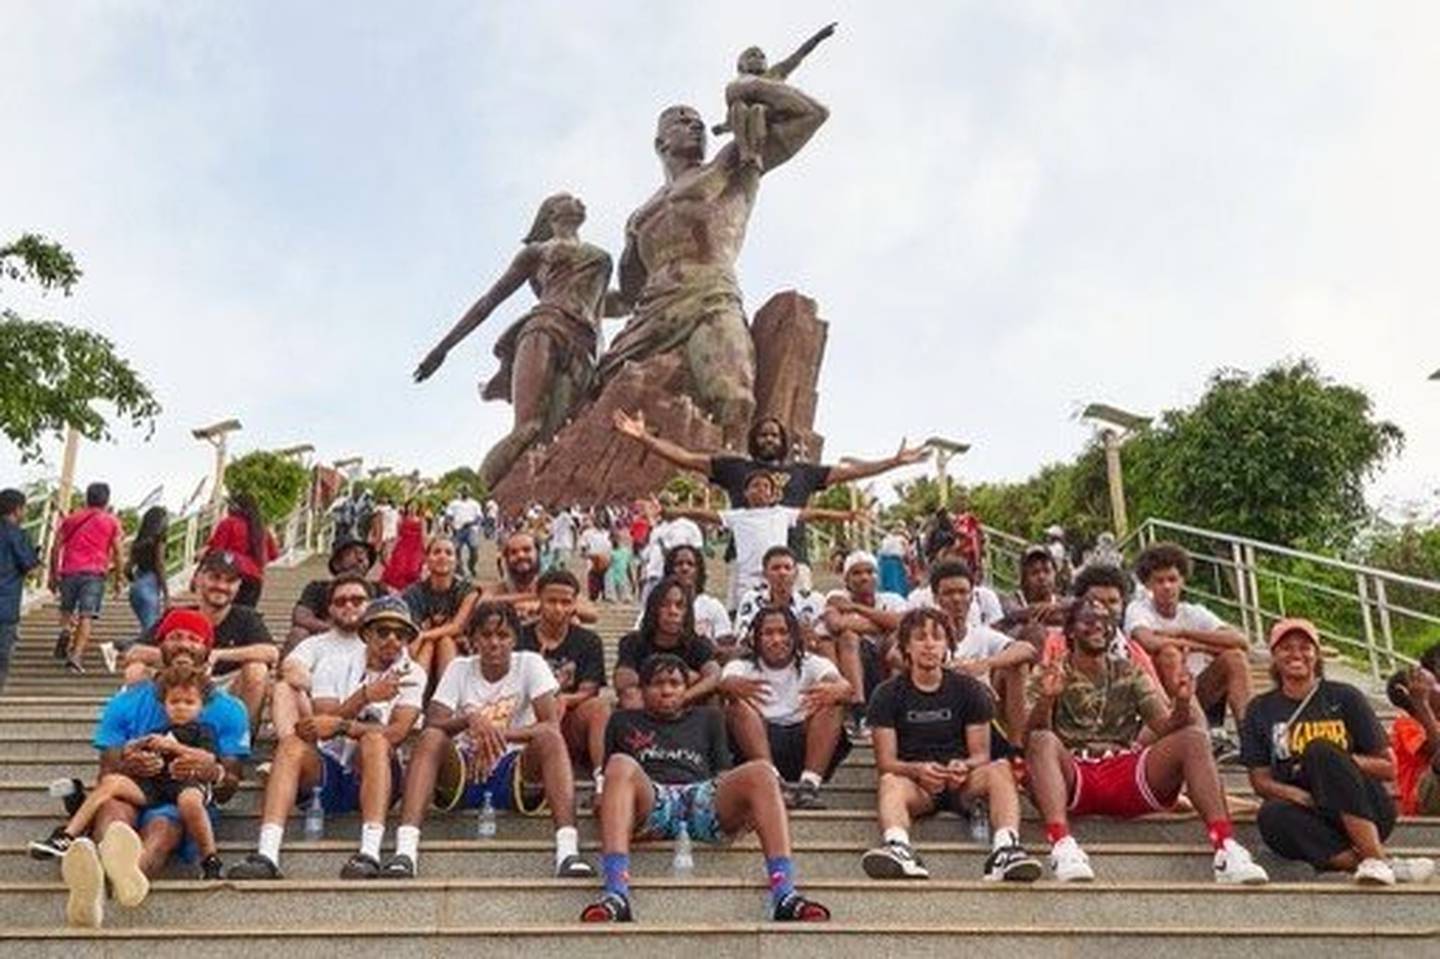 While in Senegal, the Simeon basketball teams visited the Musée de la renaissance. Here the group is photographed at the African Renaissance Monument outside Dakar, Senegal, in August 2022.